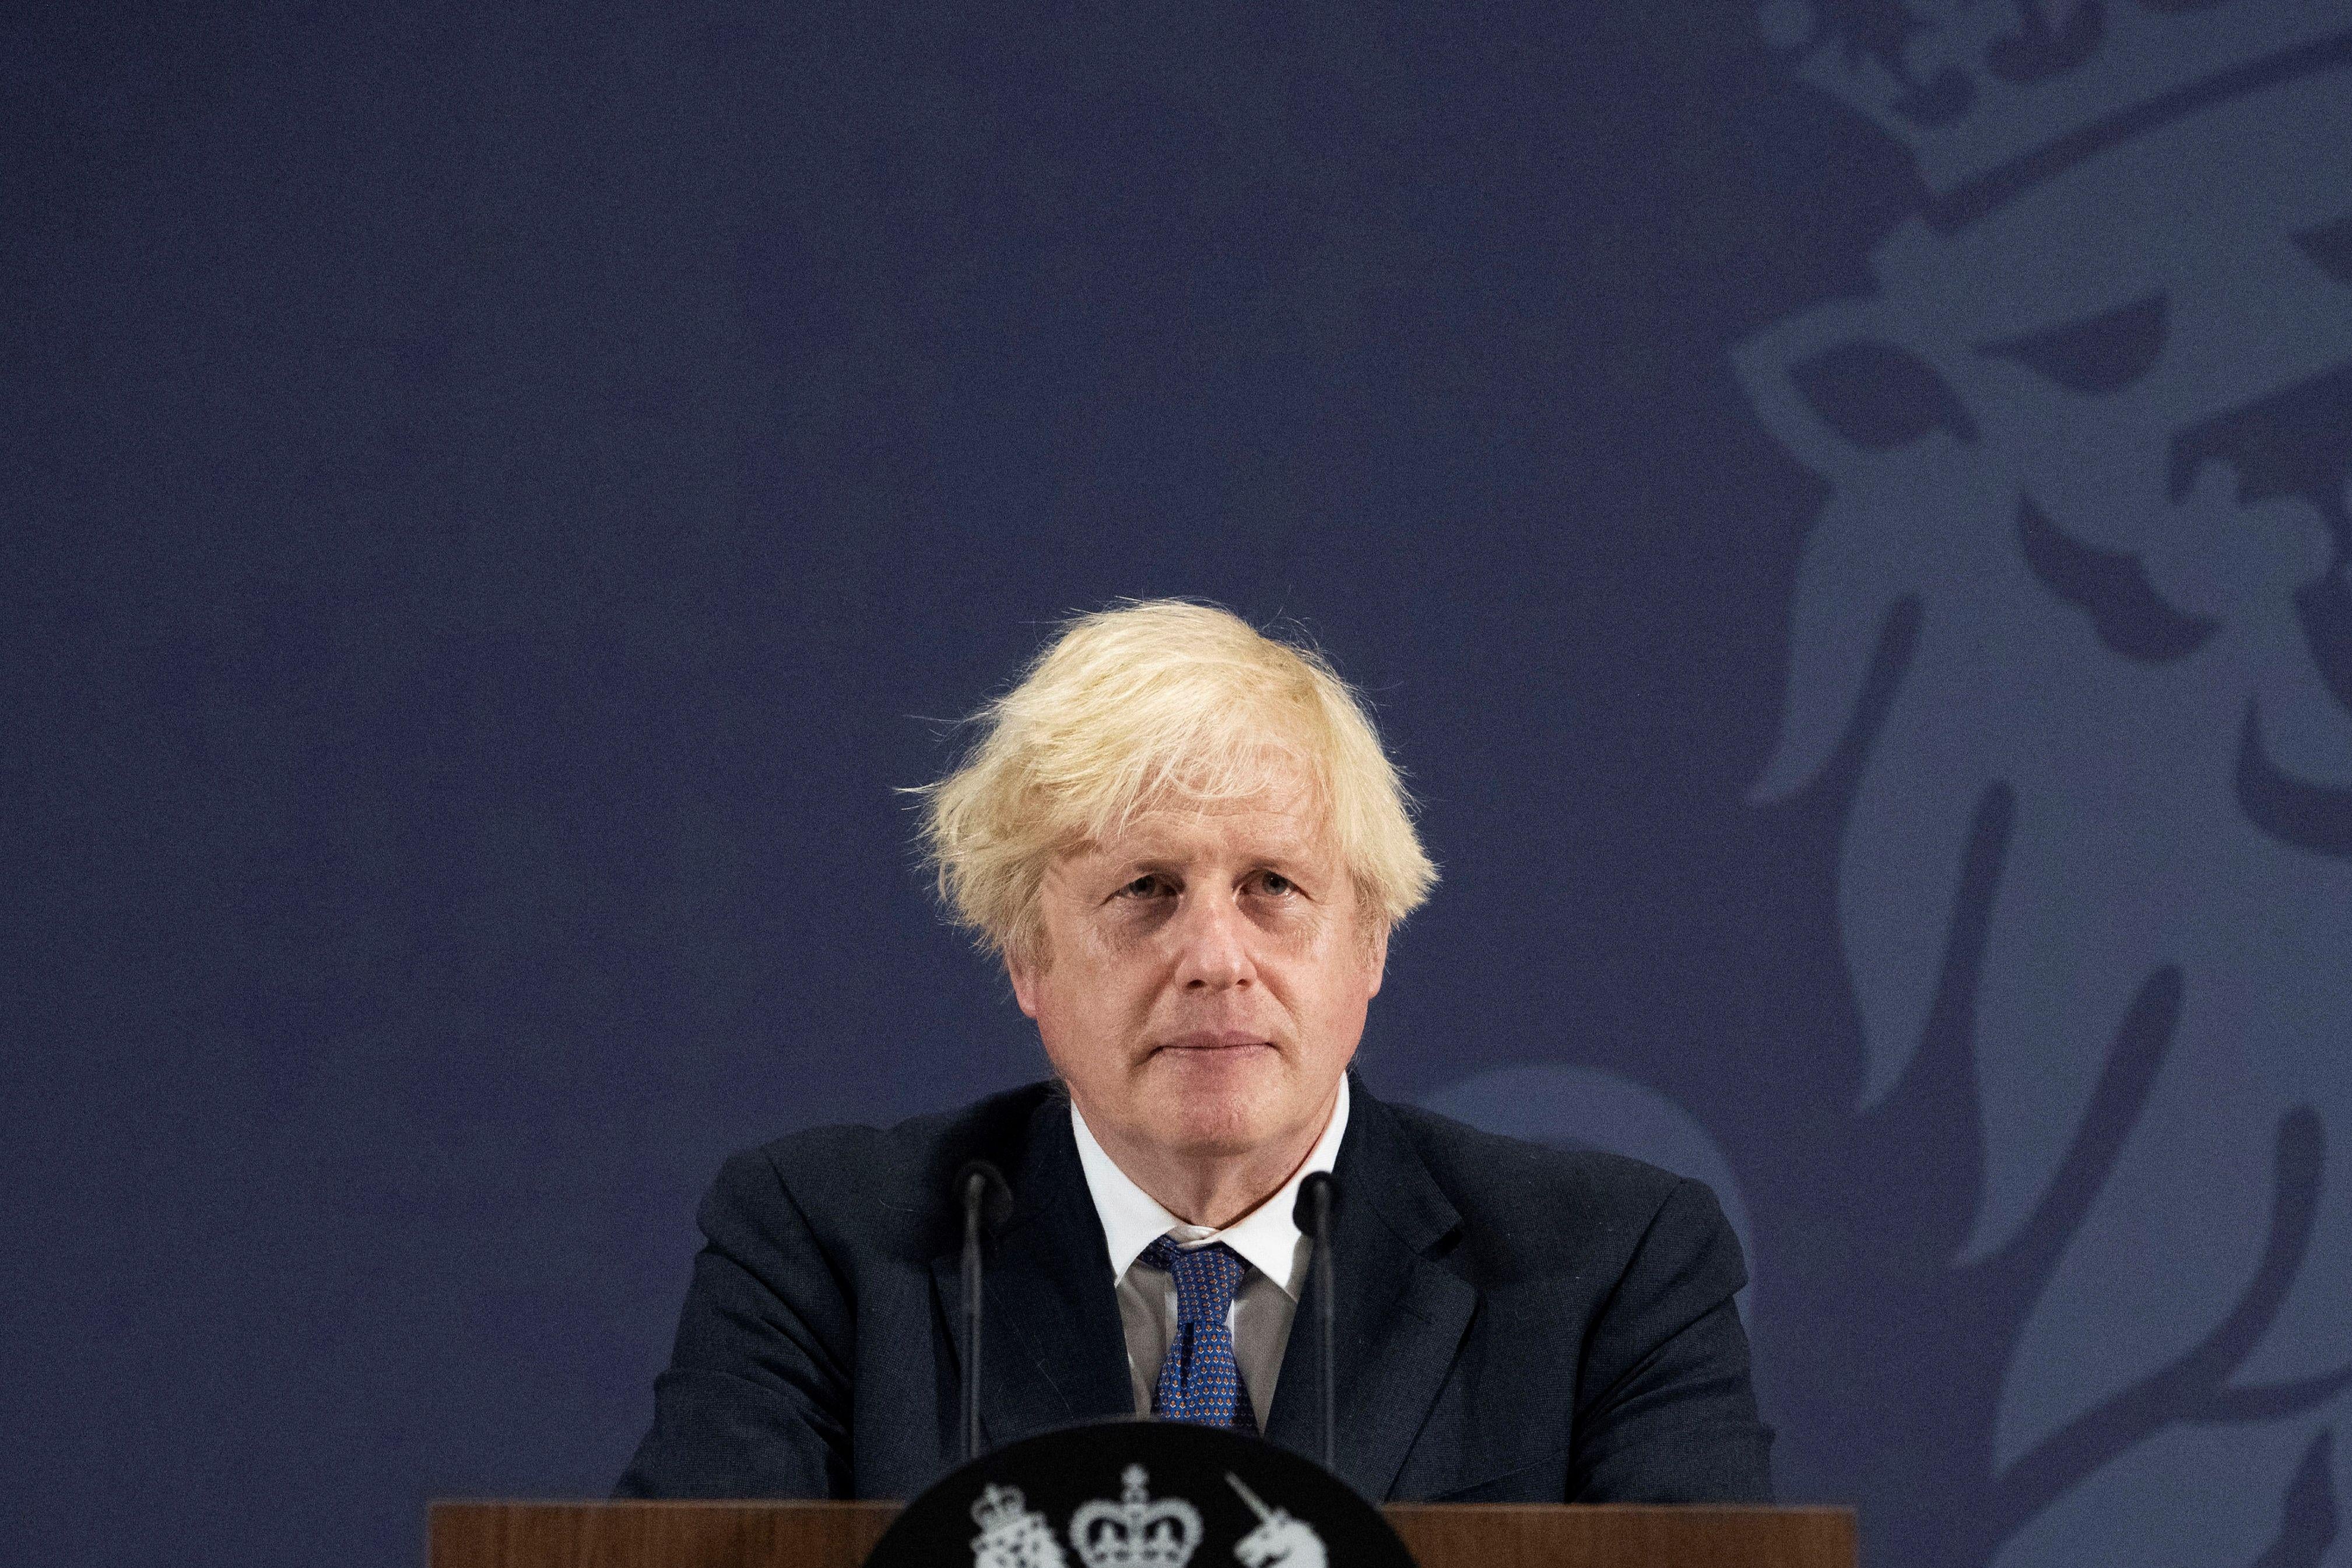 Britain's Prime Minister Boris Johnson delivers a speech in Coventry, central England on July 15, 2021. 





West Midlands.
15th July 2021 (Photo by David Rose / POOL / AFP) (Photo by DAVID ROSE/POOL/AFP via Getty Images)